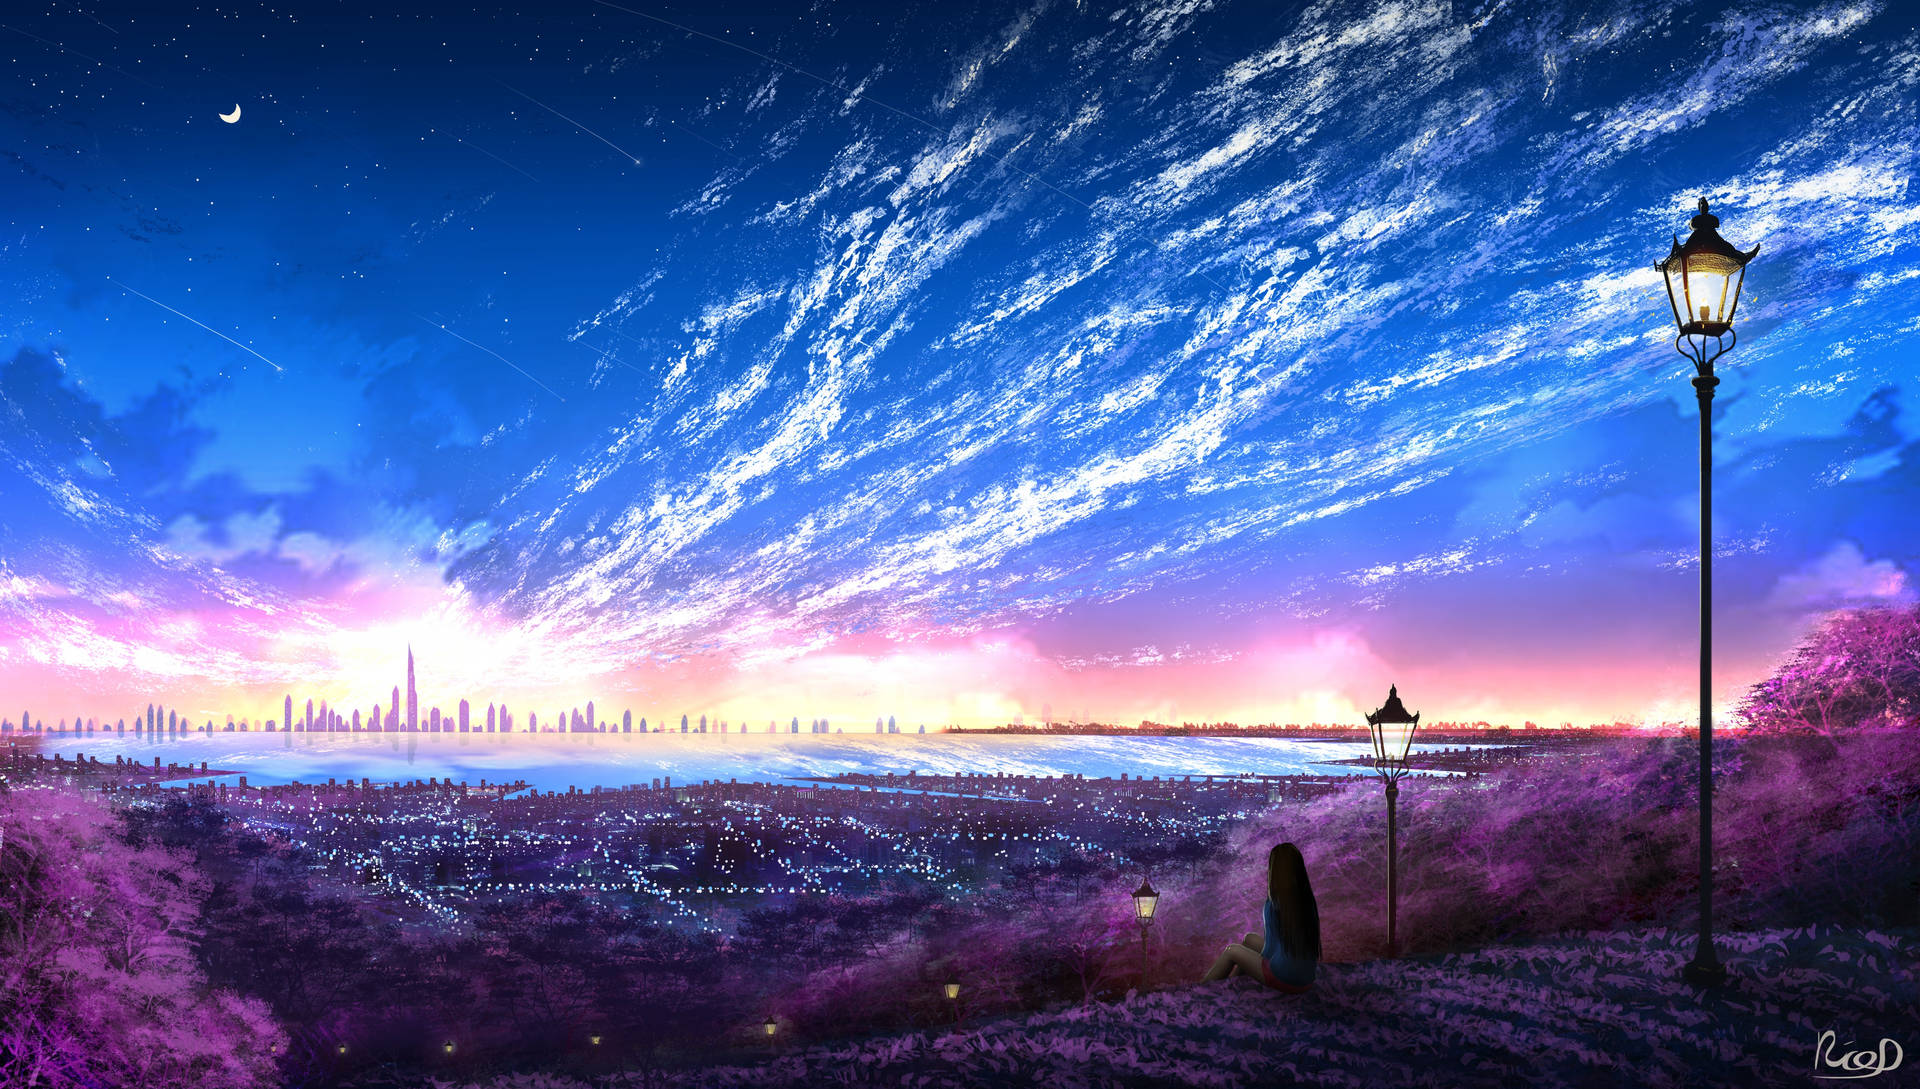 1360x768px | free download | HD wallpaper: picture-in-picture, anime girls,  city, urban, night, stars | Wallpaper Flare